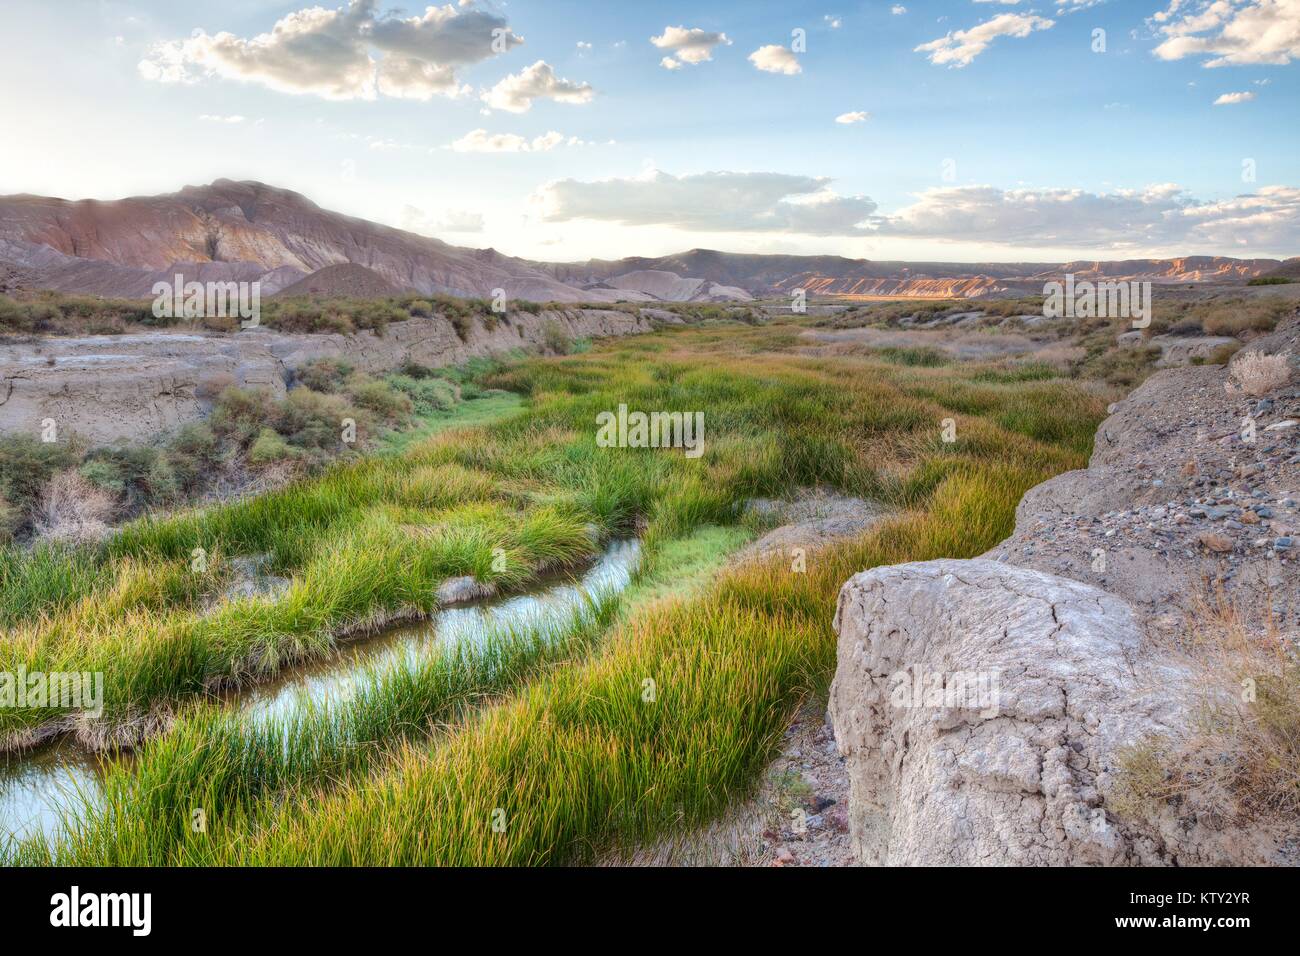 The Amargosa Wild and Scenic River flows through the Mojave Desert October 2, 2011 in California. Stock Photo